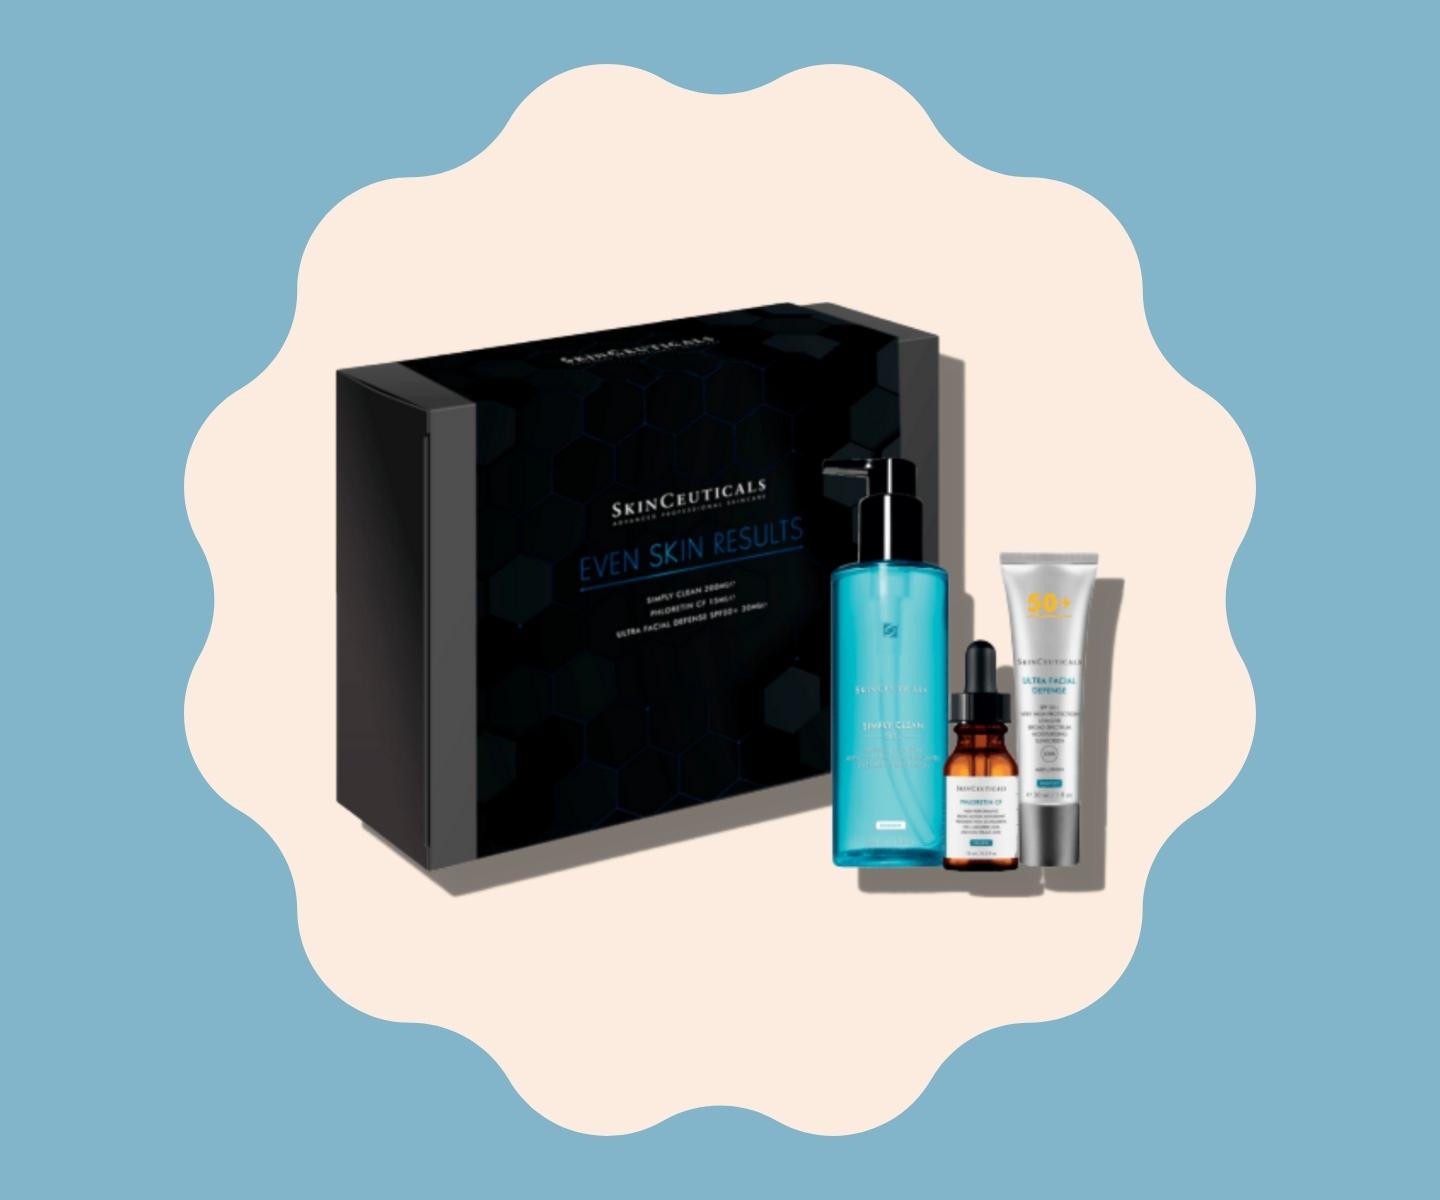 SkinCeuticals Even Skin Results